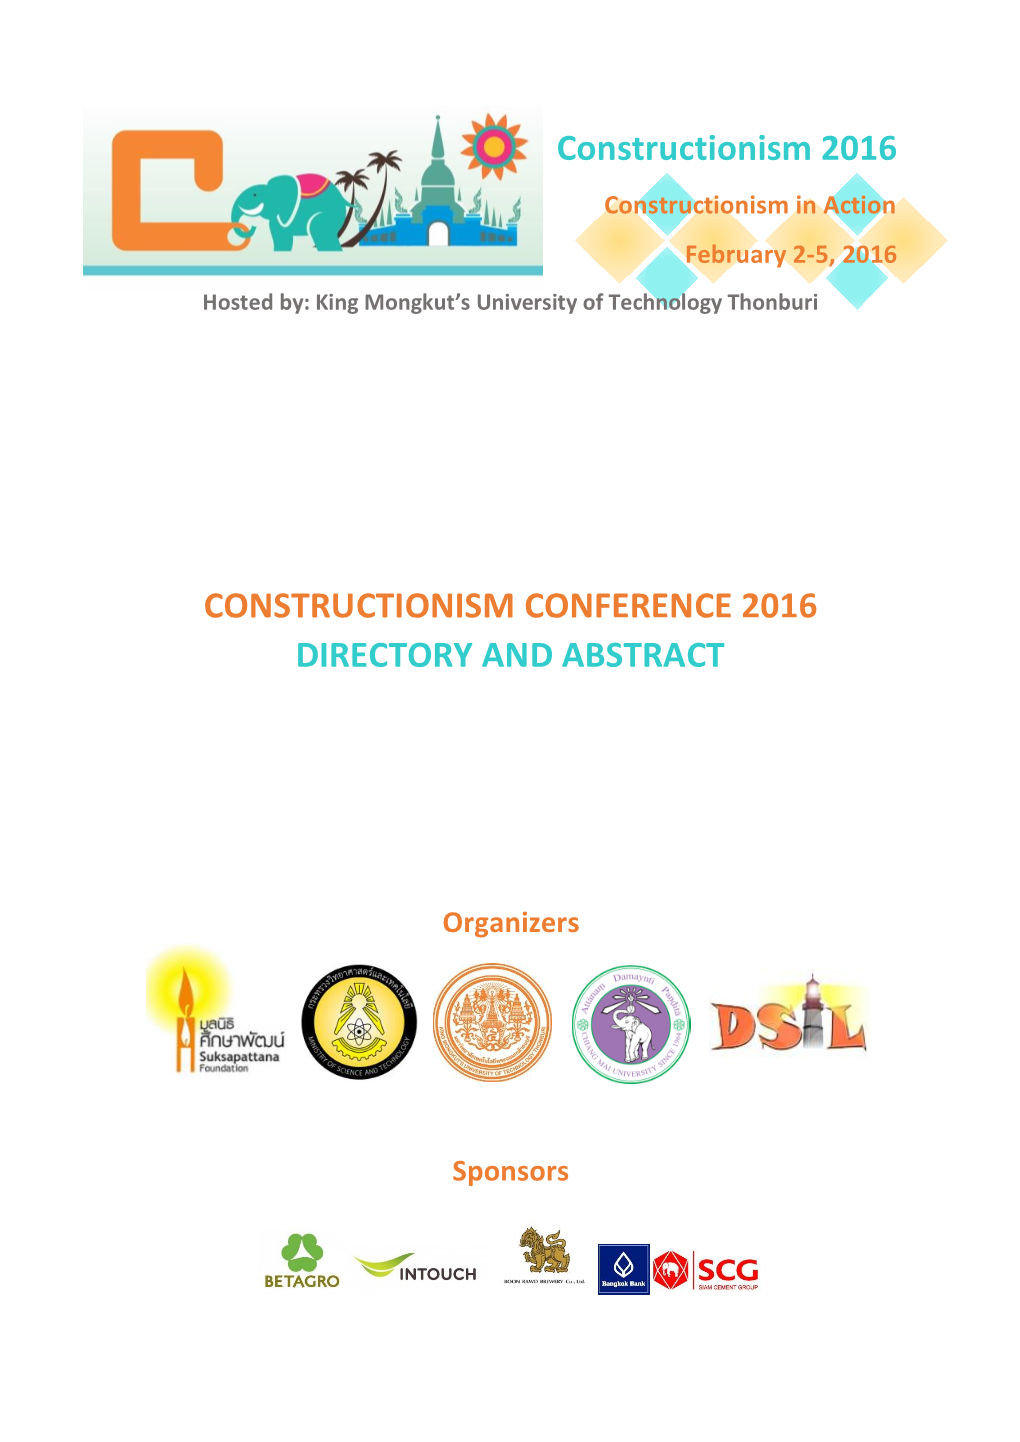 Constructionism 2016 Constructionism in Action February 2-5, 2016 Hosted By: King Mongkut’S University of Technology Thonburi